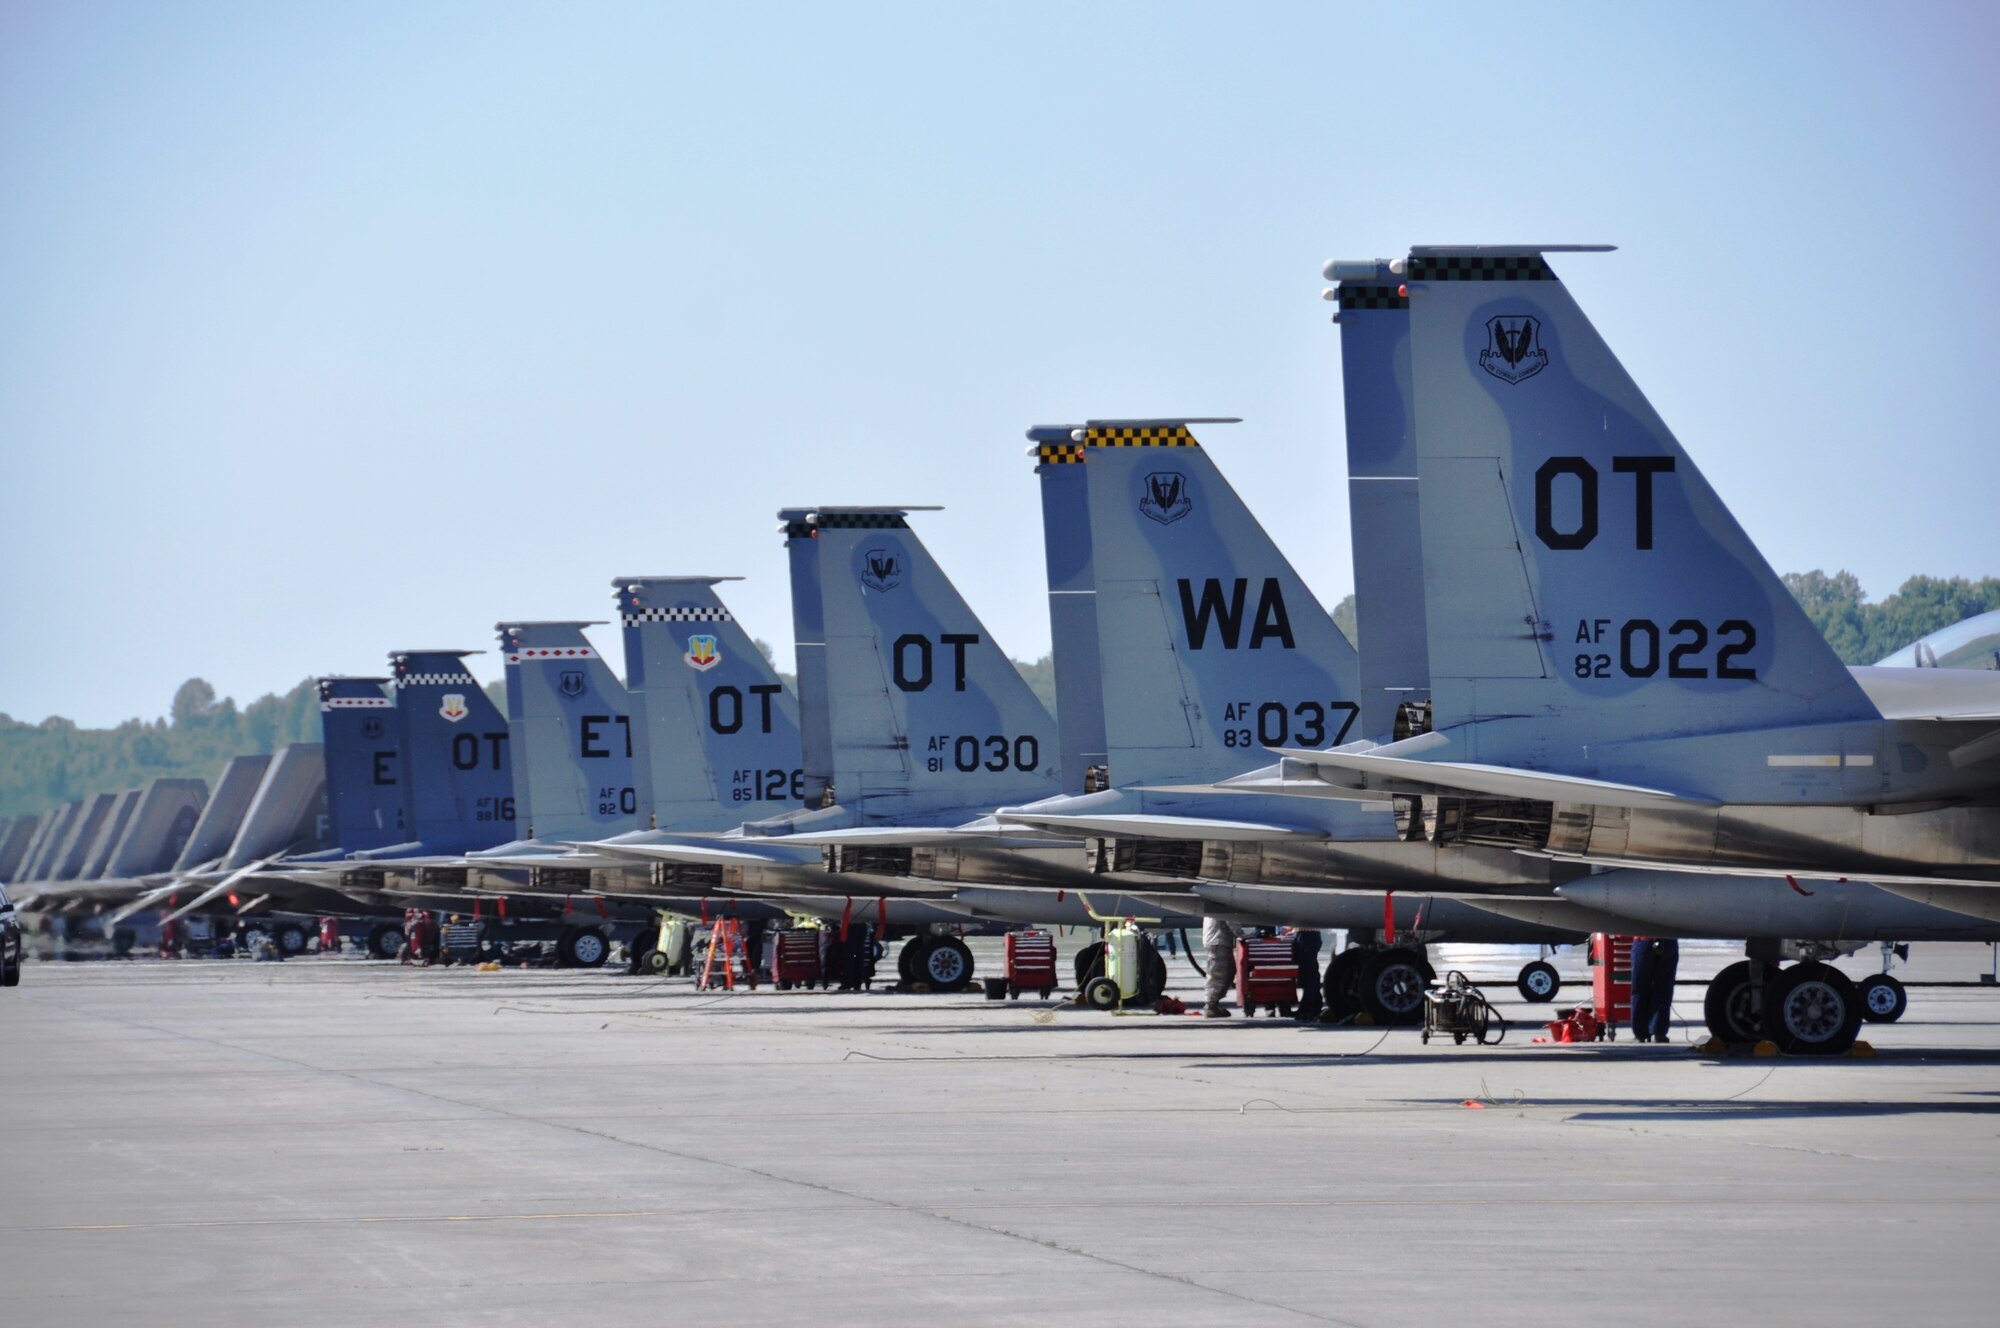 Aircraft from test and evaluation squadrons across the Air Force line up on the Joint Base Elmendorf-Richardson, Alaska, flightline, June 24, 2015. Northern Edge is Alaska’s premier joint training exercise designed to practice operations, techniques and procedures as well as enhance interoperability among the services. Thousands of service members from active duty, Reserve and National Guard units are involved. (U.S. Air Force photo by Capt. Tania Bryan/Released)